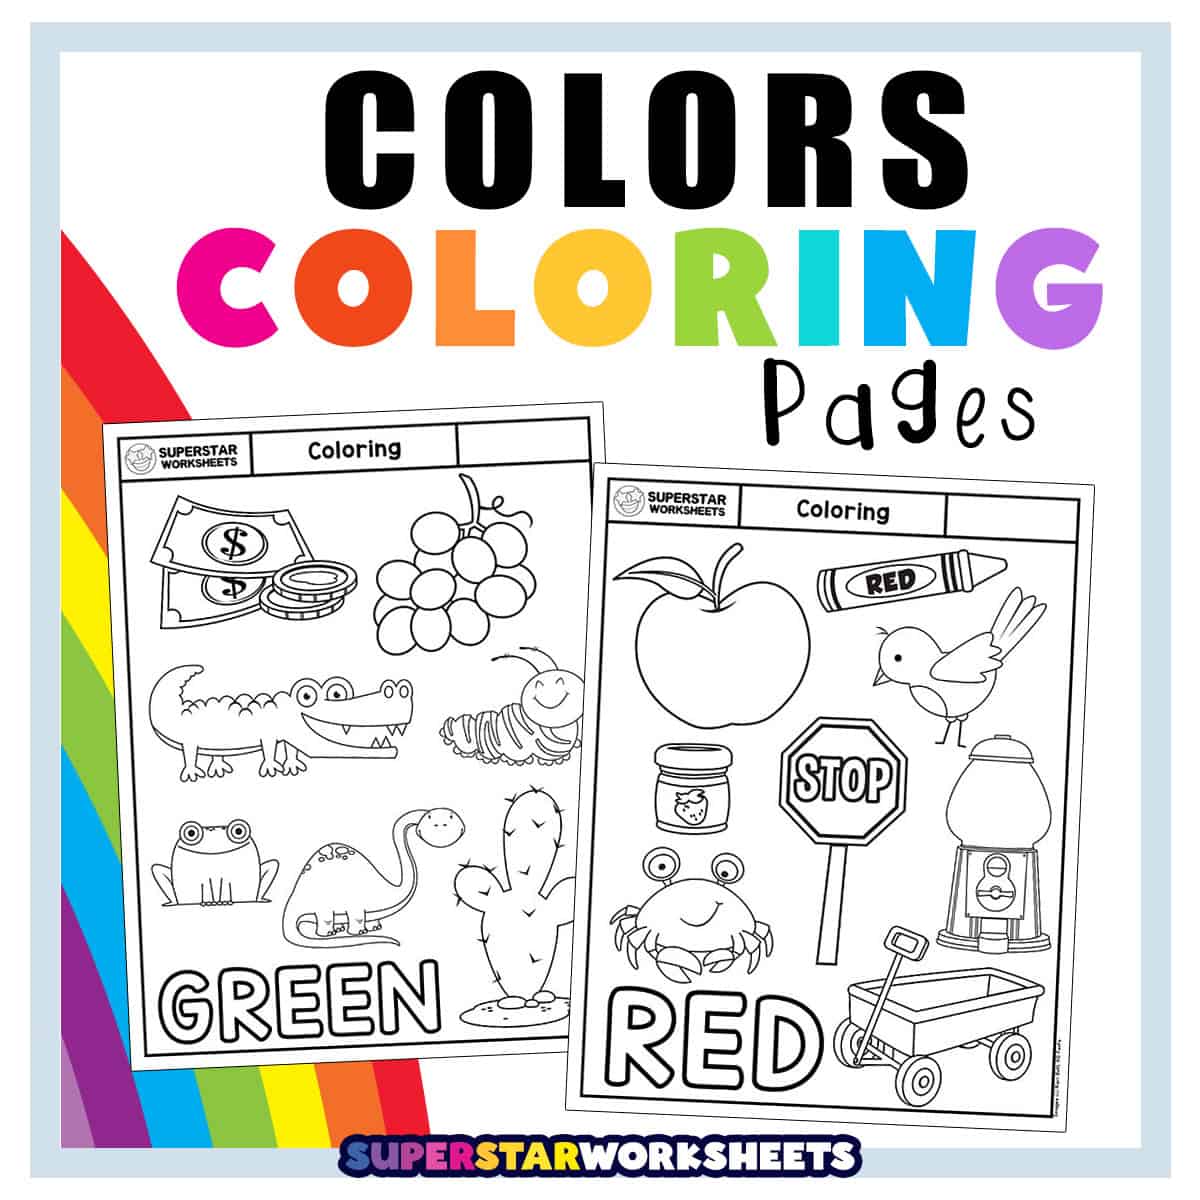 Learning colors for kids  Learn colors by coloring with red, orange, and  yellow pencils 